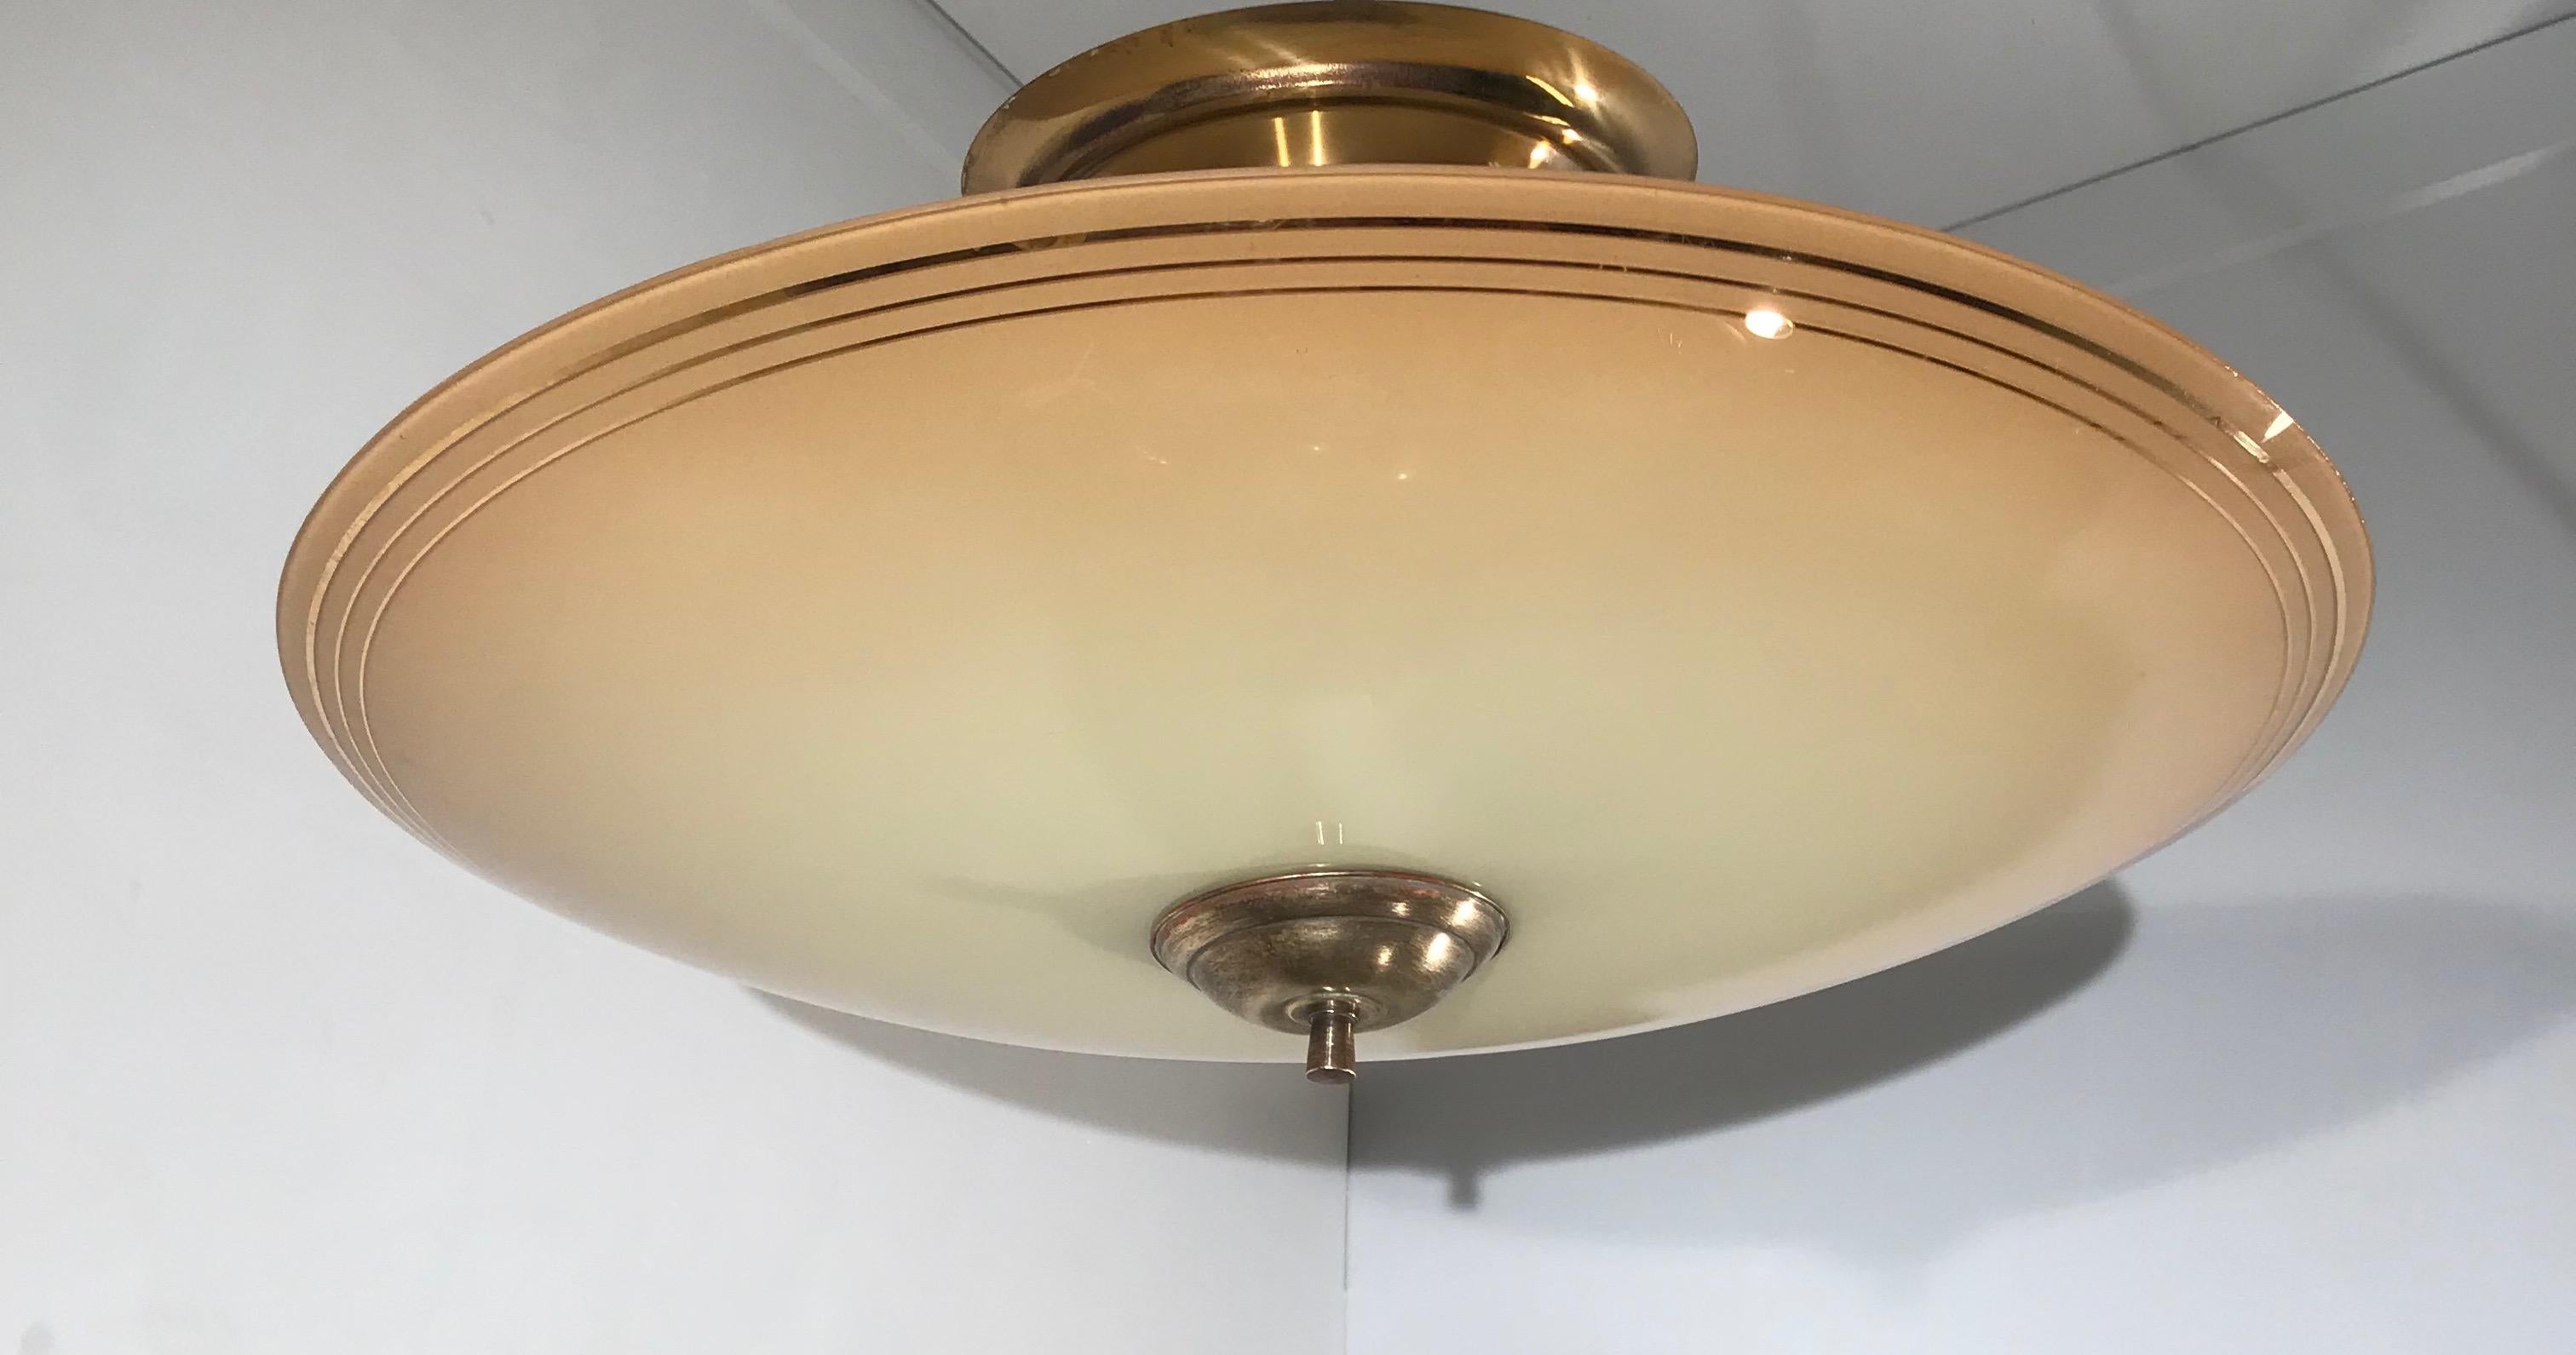 Beautiful shape and colorful light extra large fixture from the Midcentury era.

This midcentury work of (lighting) art is another one of our recent, wonderful finds. As you can see, the sleek and almost flat glass shade comes with a stylish golden